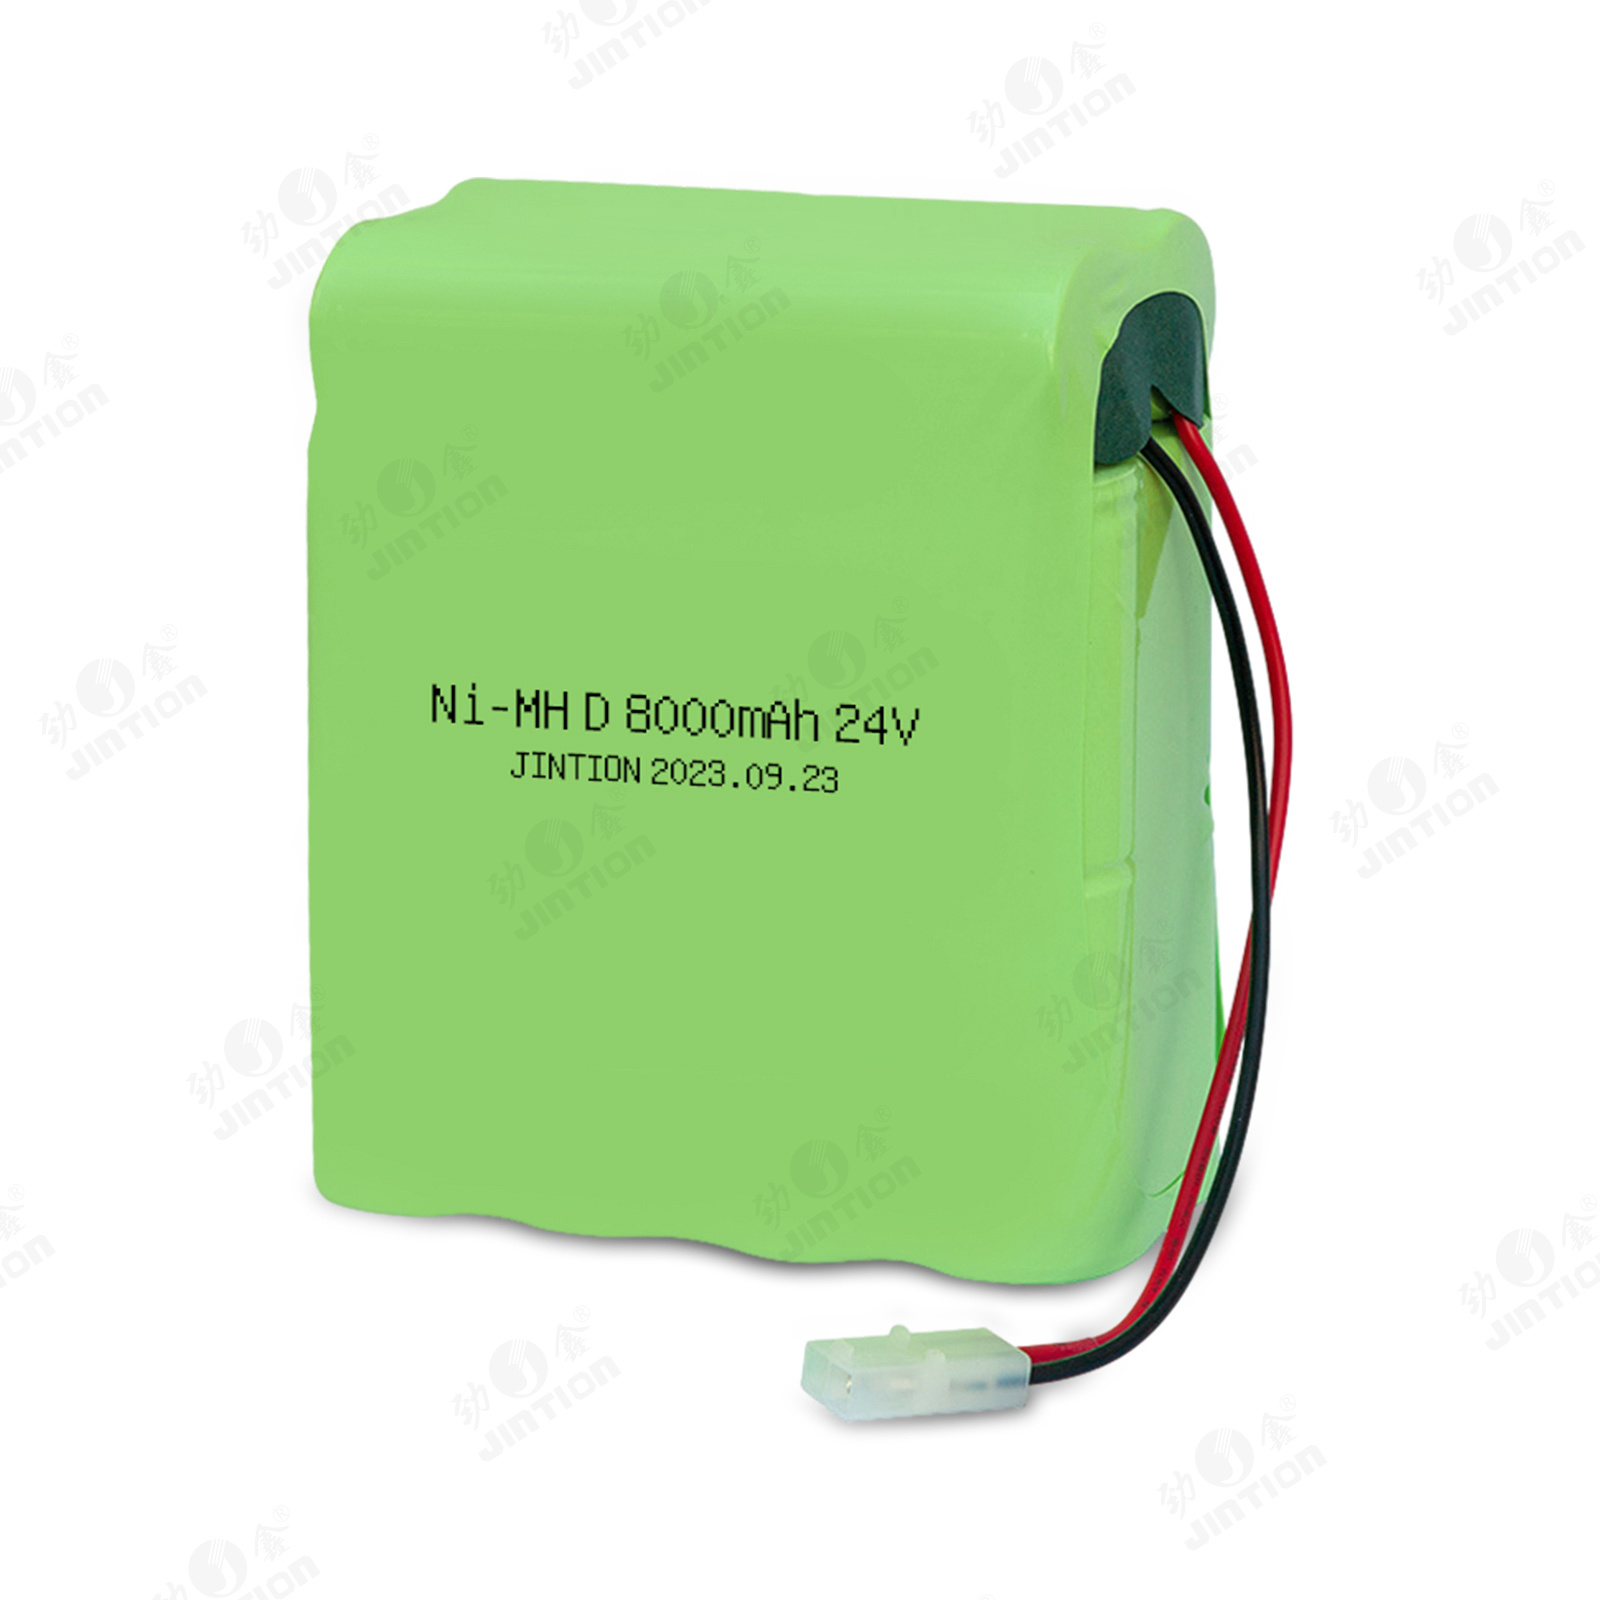 24V Ni-MH D rechargeable battery nimh batteries 8000mAh for Miner's lamp hyperthermia